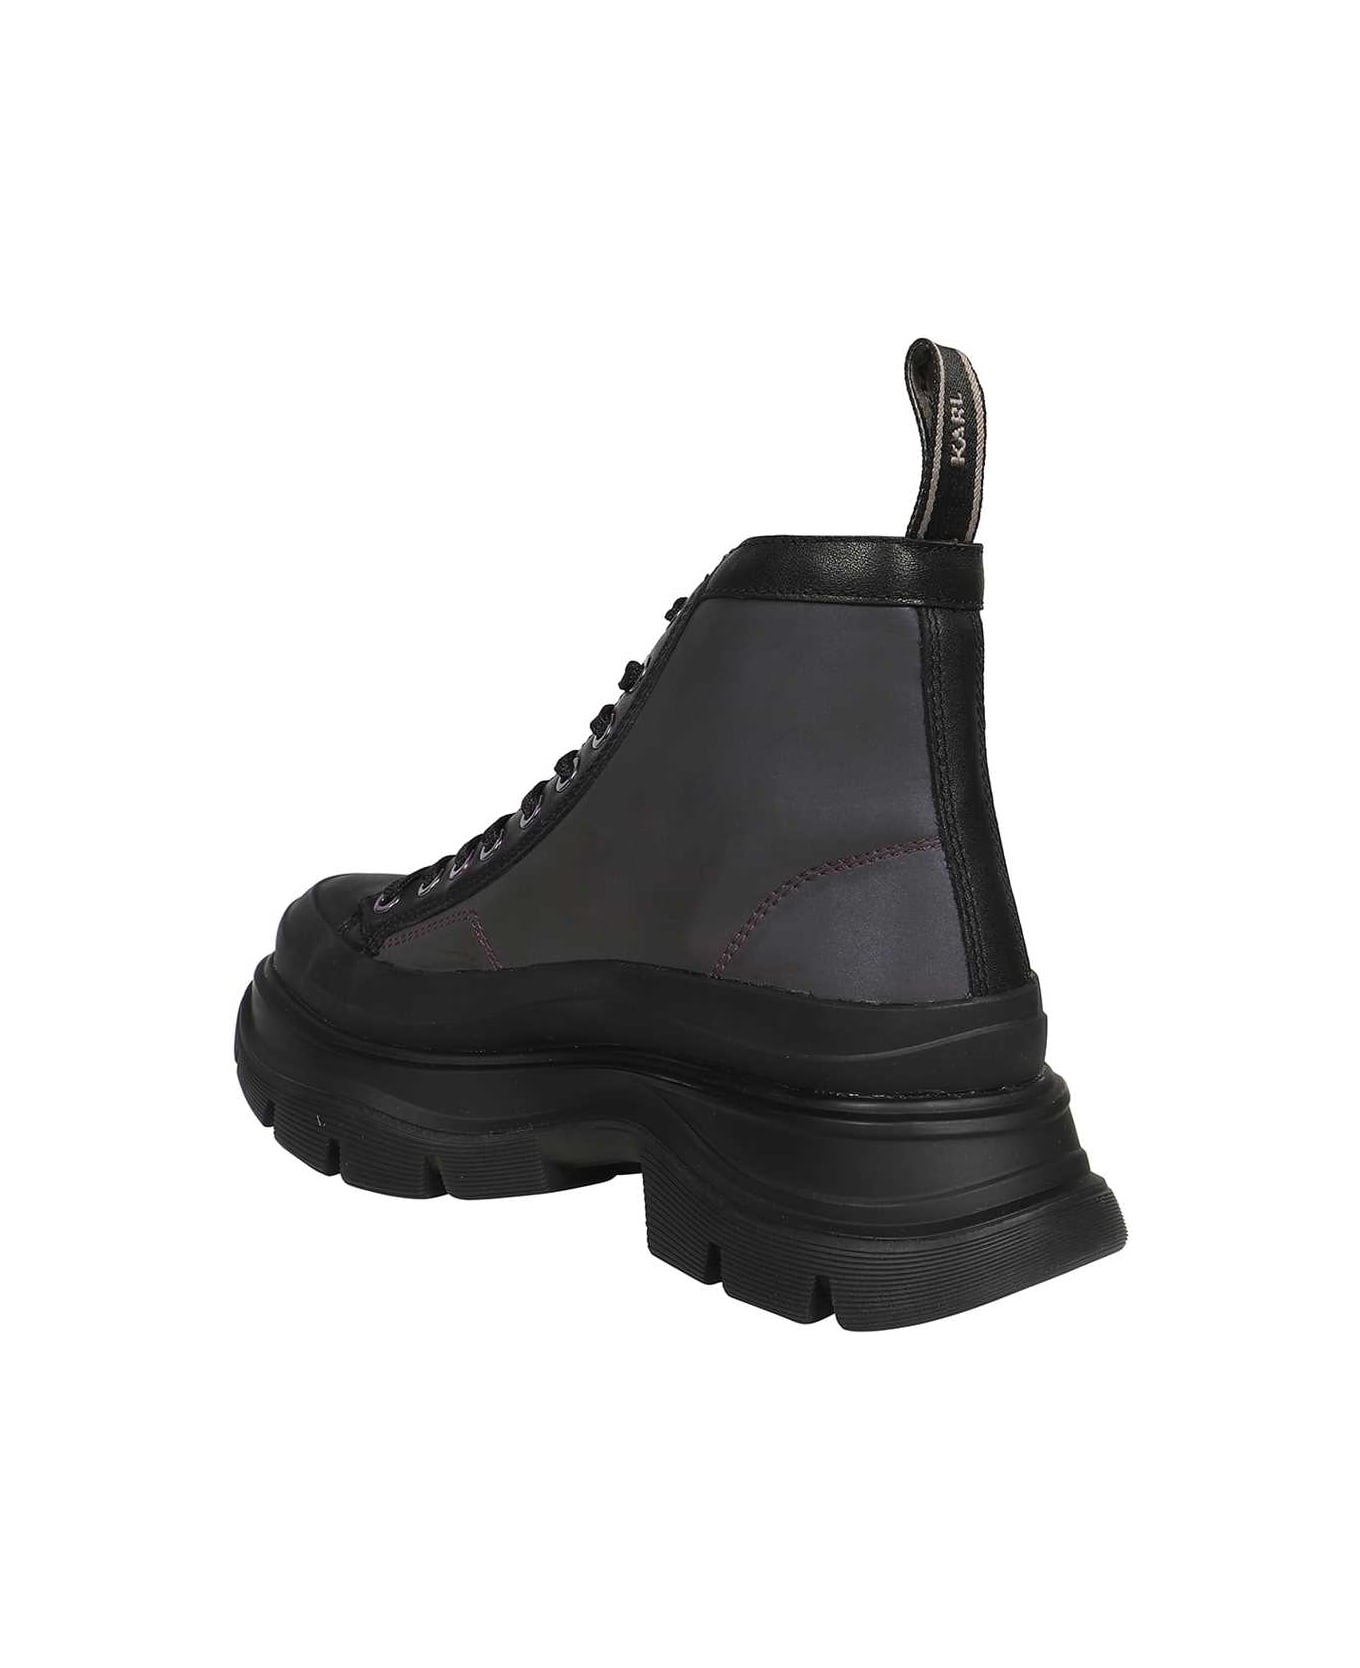 Karl Lagerfeld Lace-up Ankle Boots - black